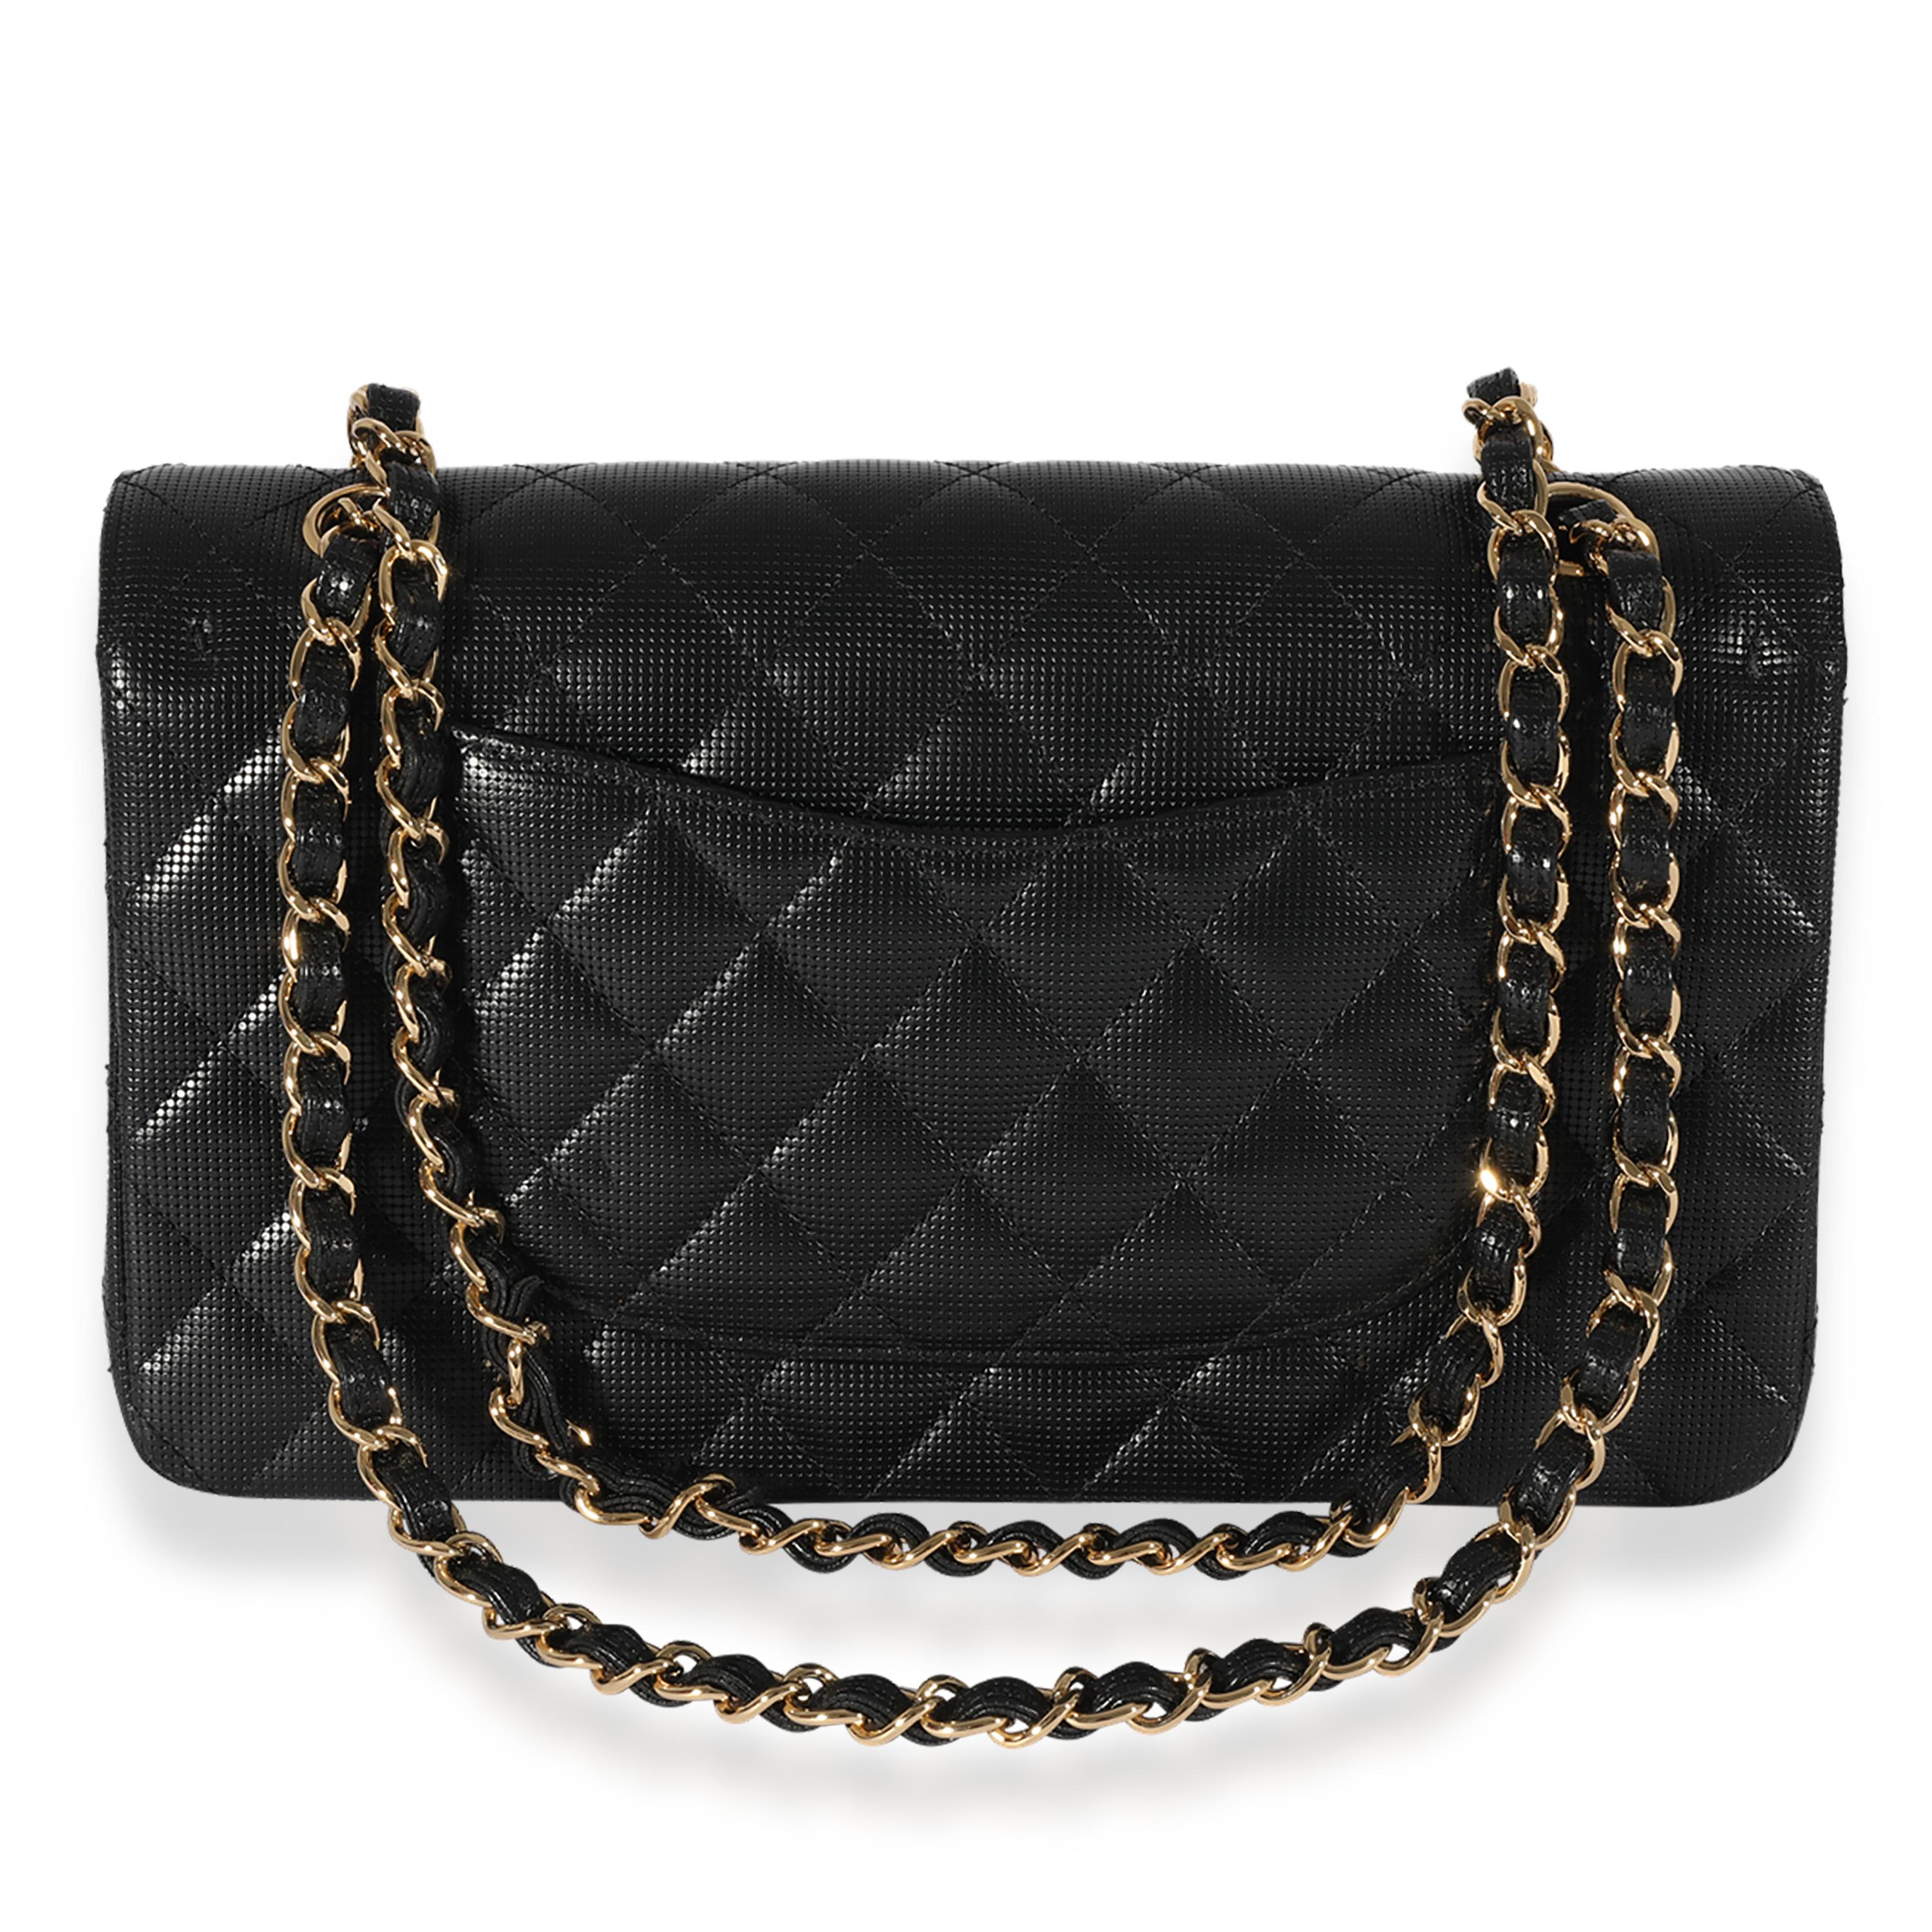 Chanel Black Quilted Perforated Lambskin Medium Classic Double Flap Bag In Excellent Condition For Sale In New York, NY